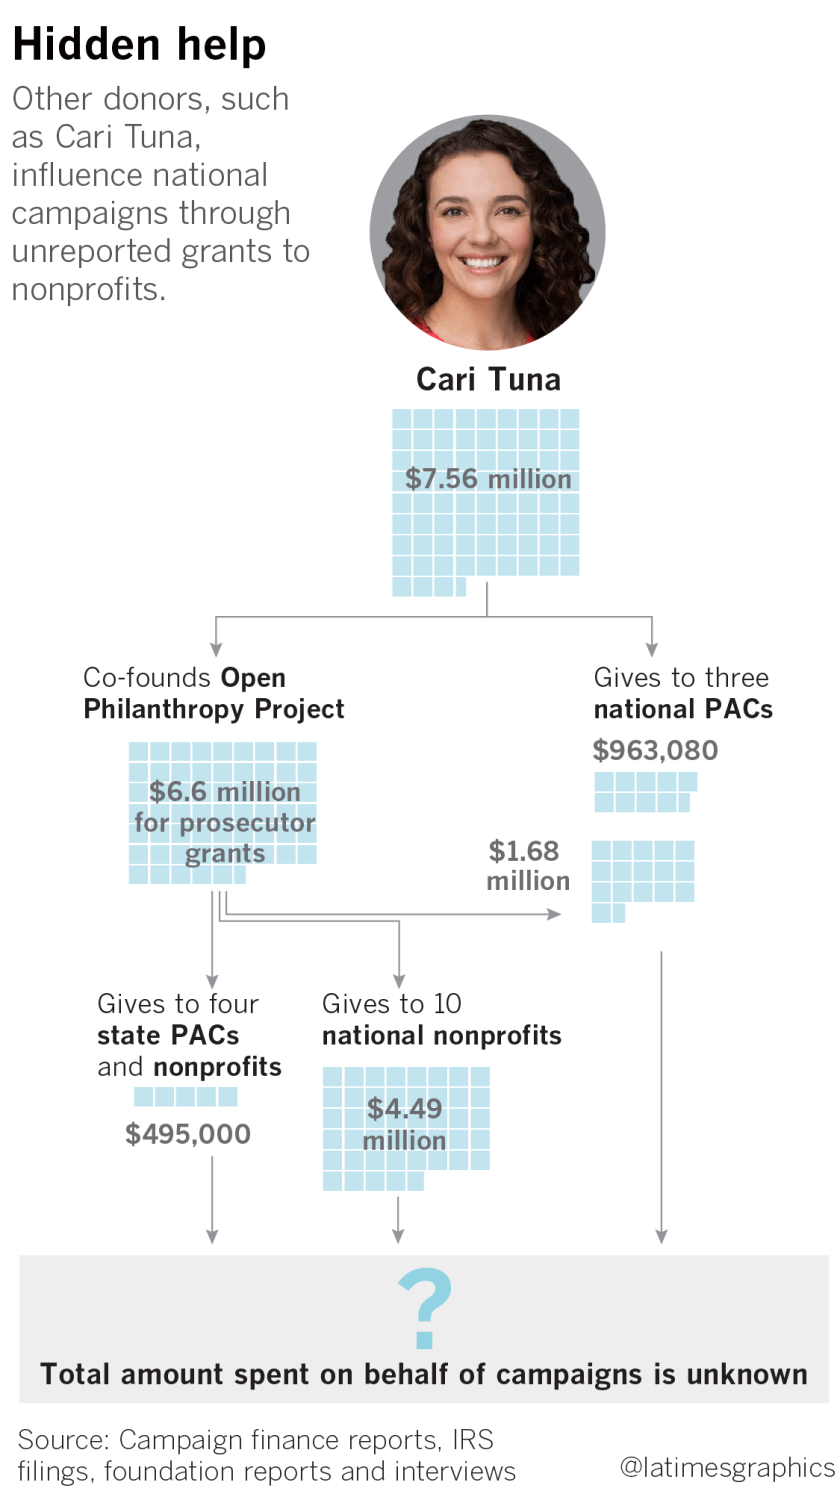 Other donors, such as Cari Tuna, influence national campaigns through unreported grants to nonprofits.